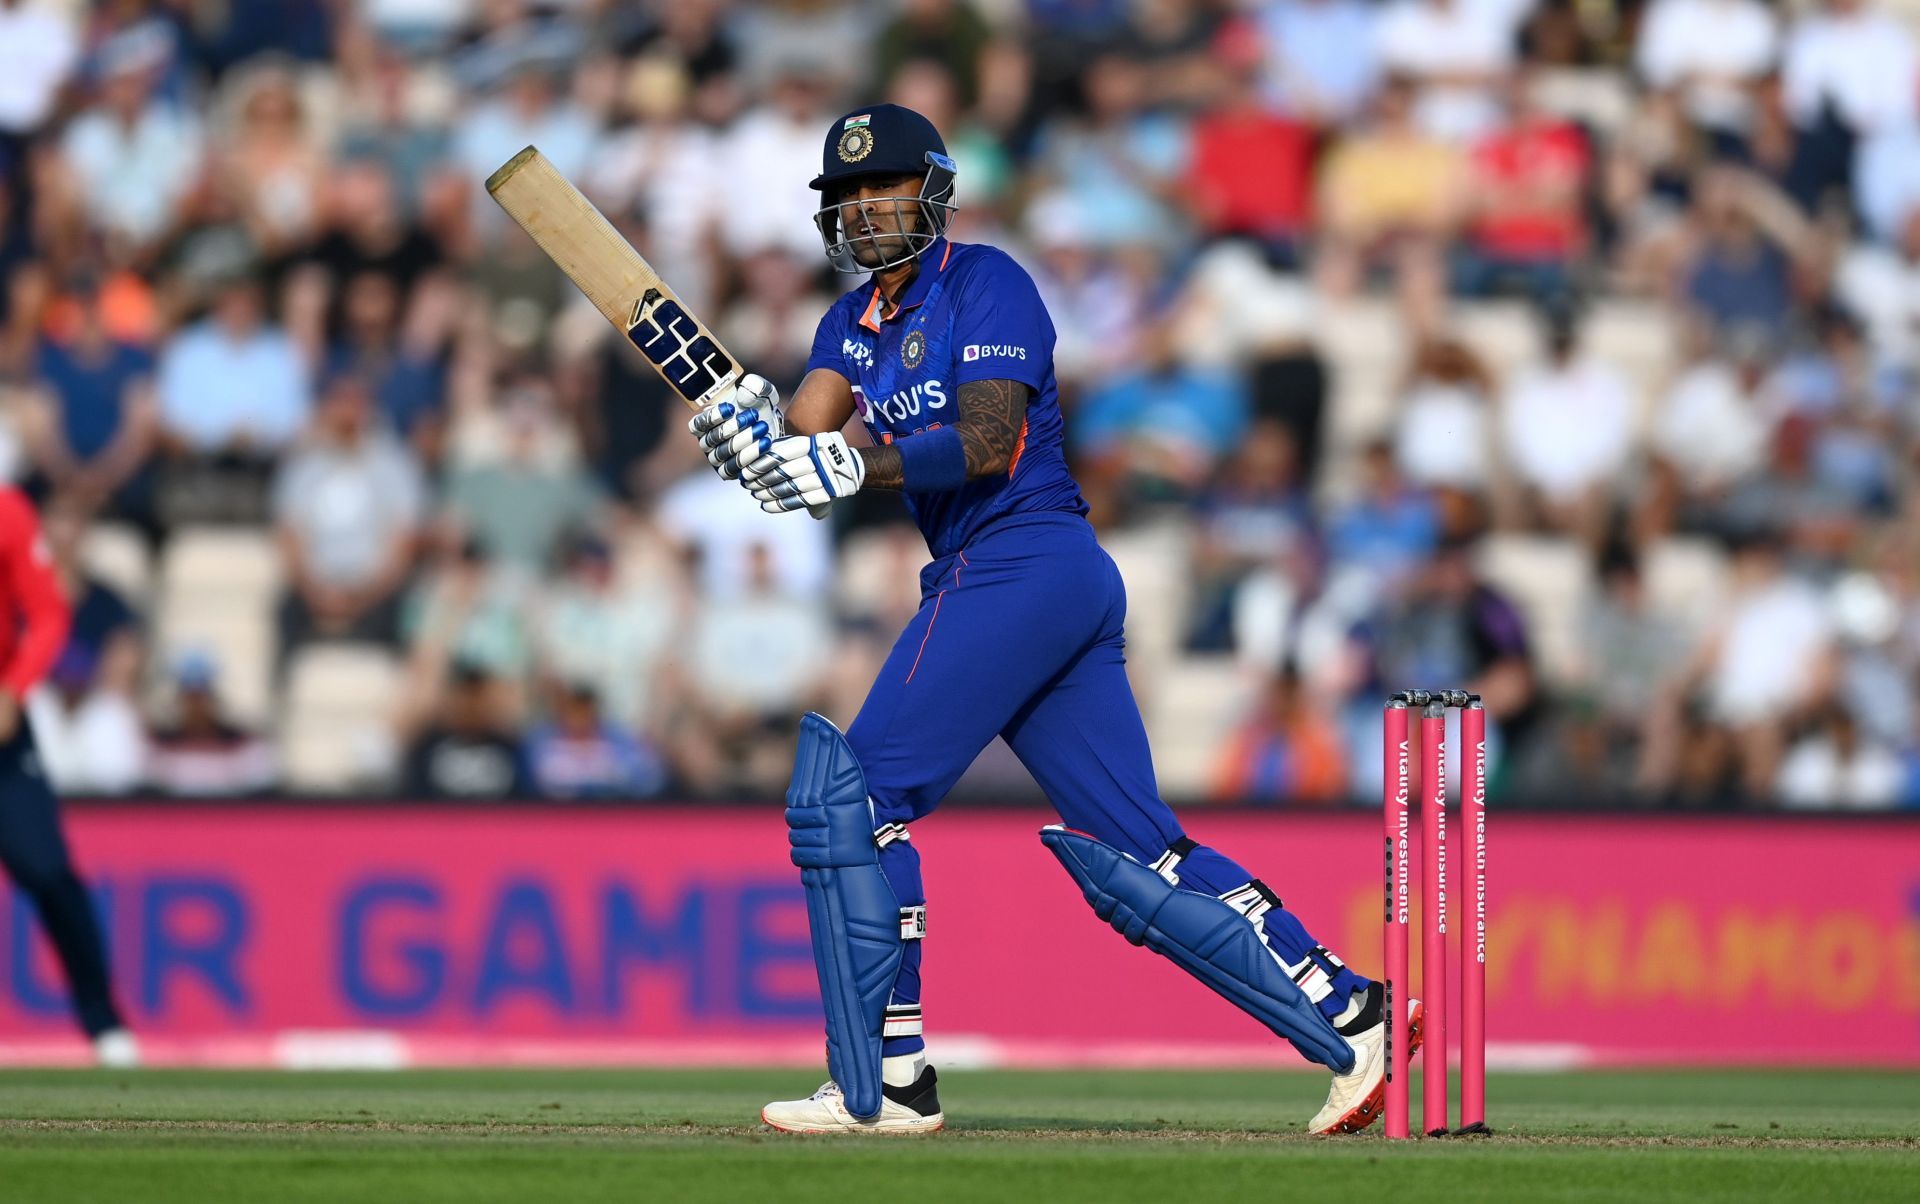 Suryakumar Yadav bats during the 1st T20I between England and India. Pic: Getty Images